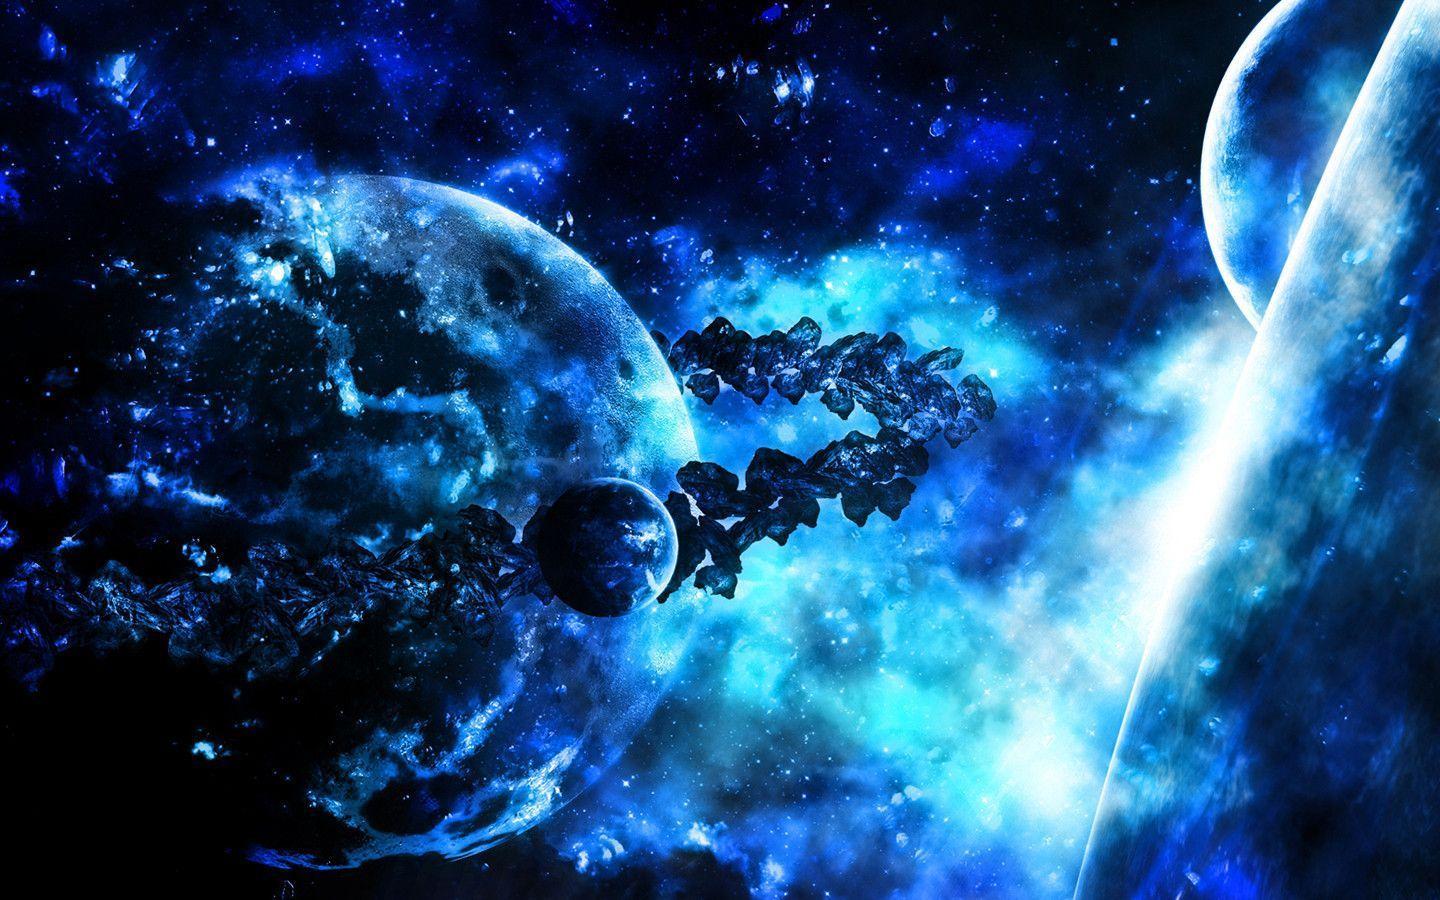 Download Space Fantasy Set Awesome Wallpaper 1440x900. Full HD